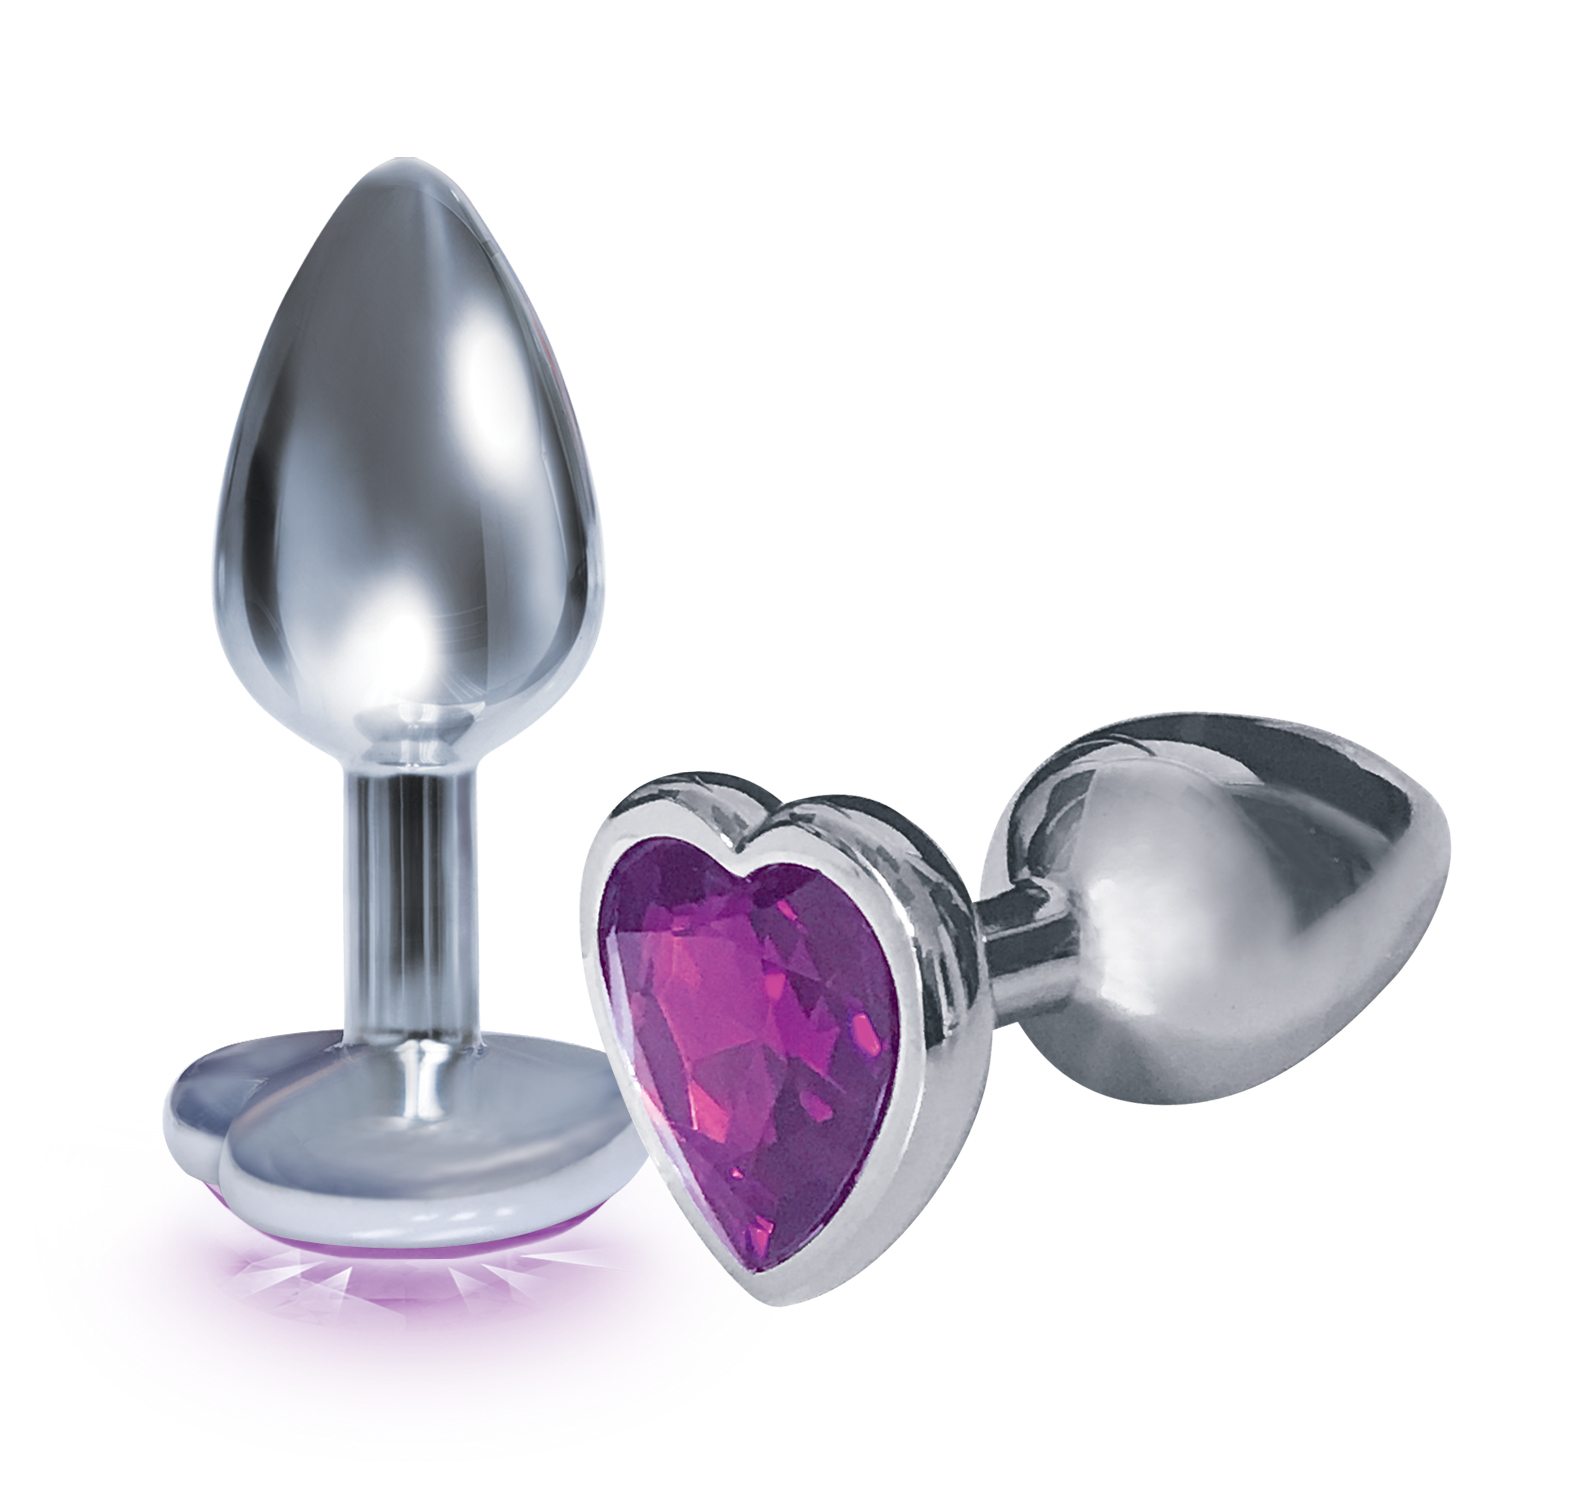 the s the silver starter heart bejeweled stainless steel plug violet 